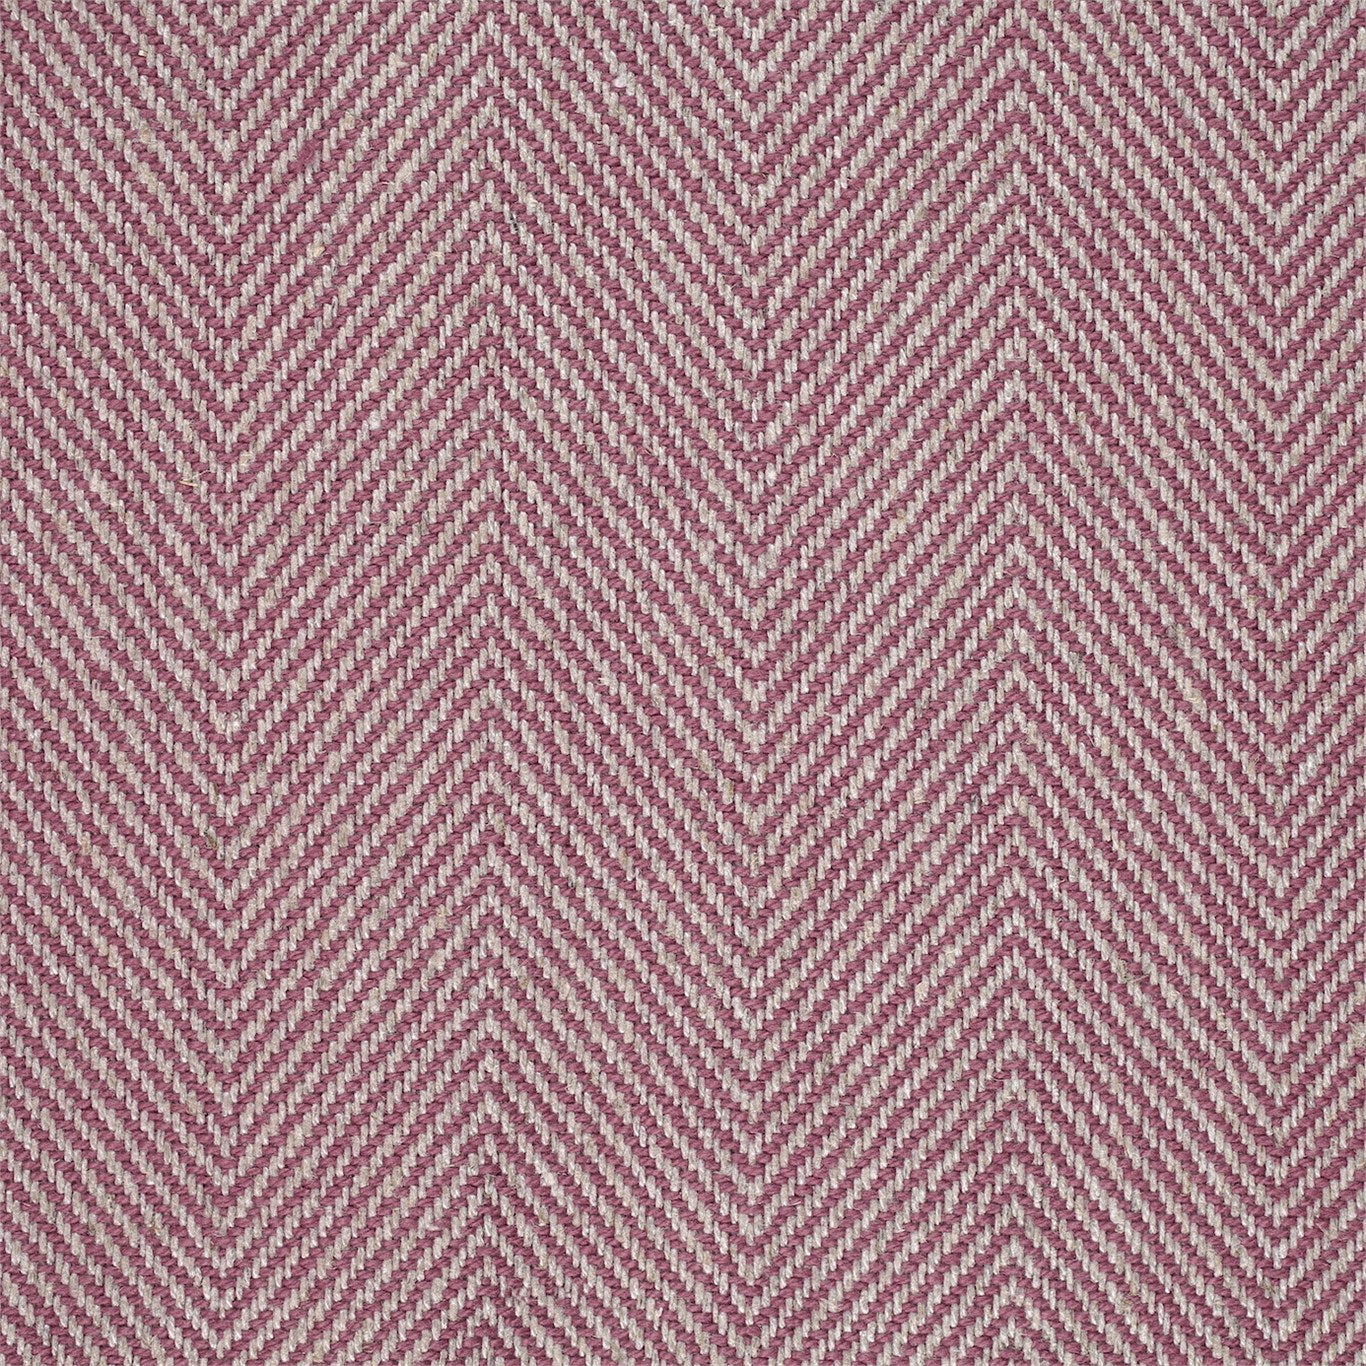 Chika Fabric by Sanderson Home - DCHK233565 - Rose